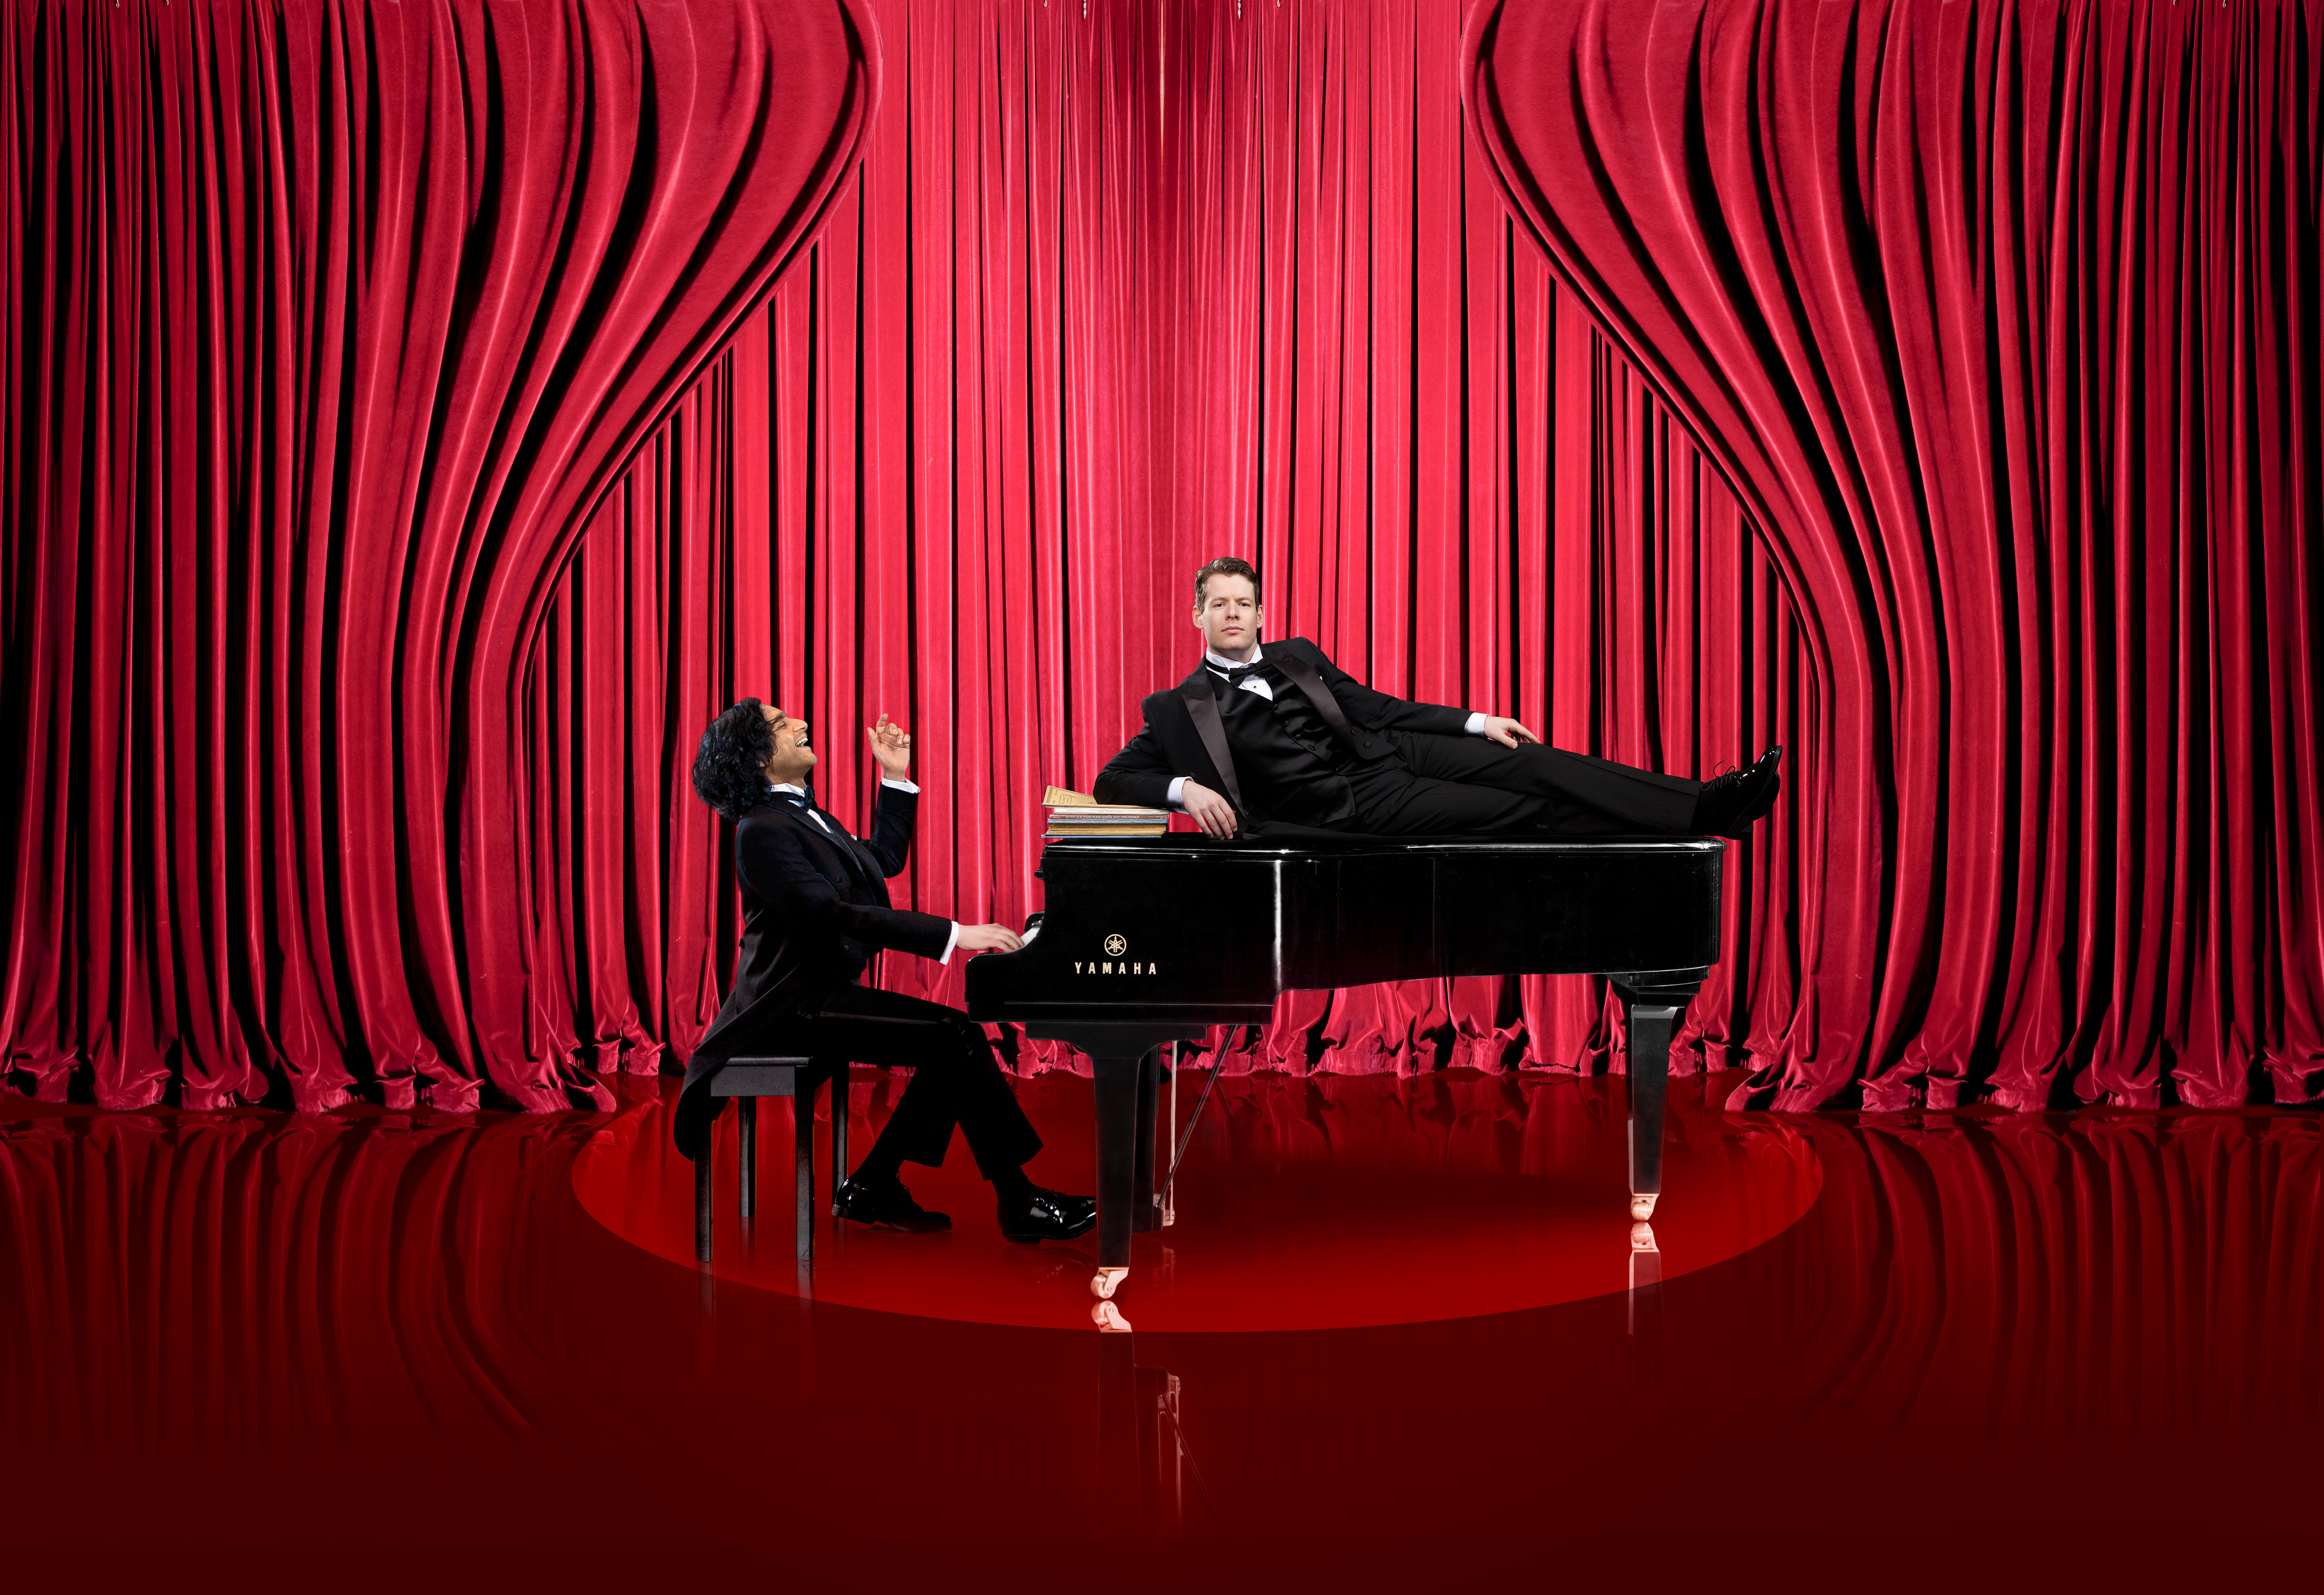 PAST EVENT: 2 Pianos 4 Hands – Academy Theatre (Lindsay, ON) July 14, 2019